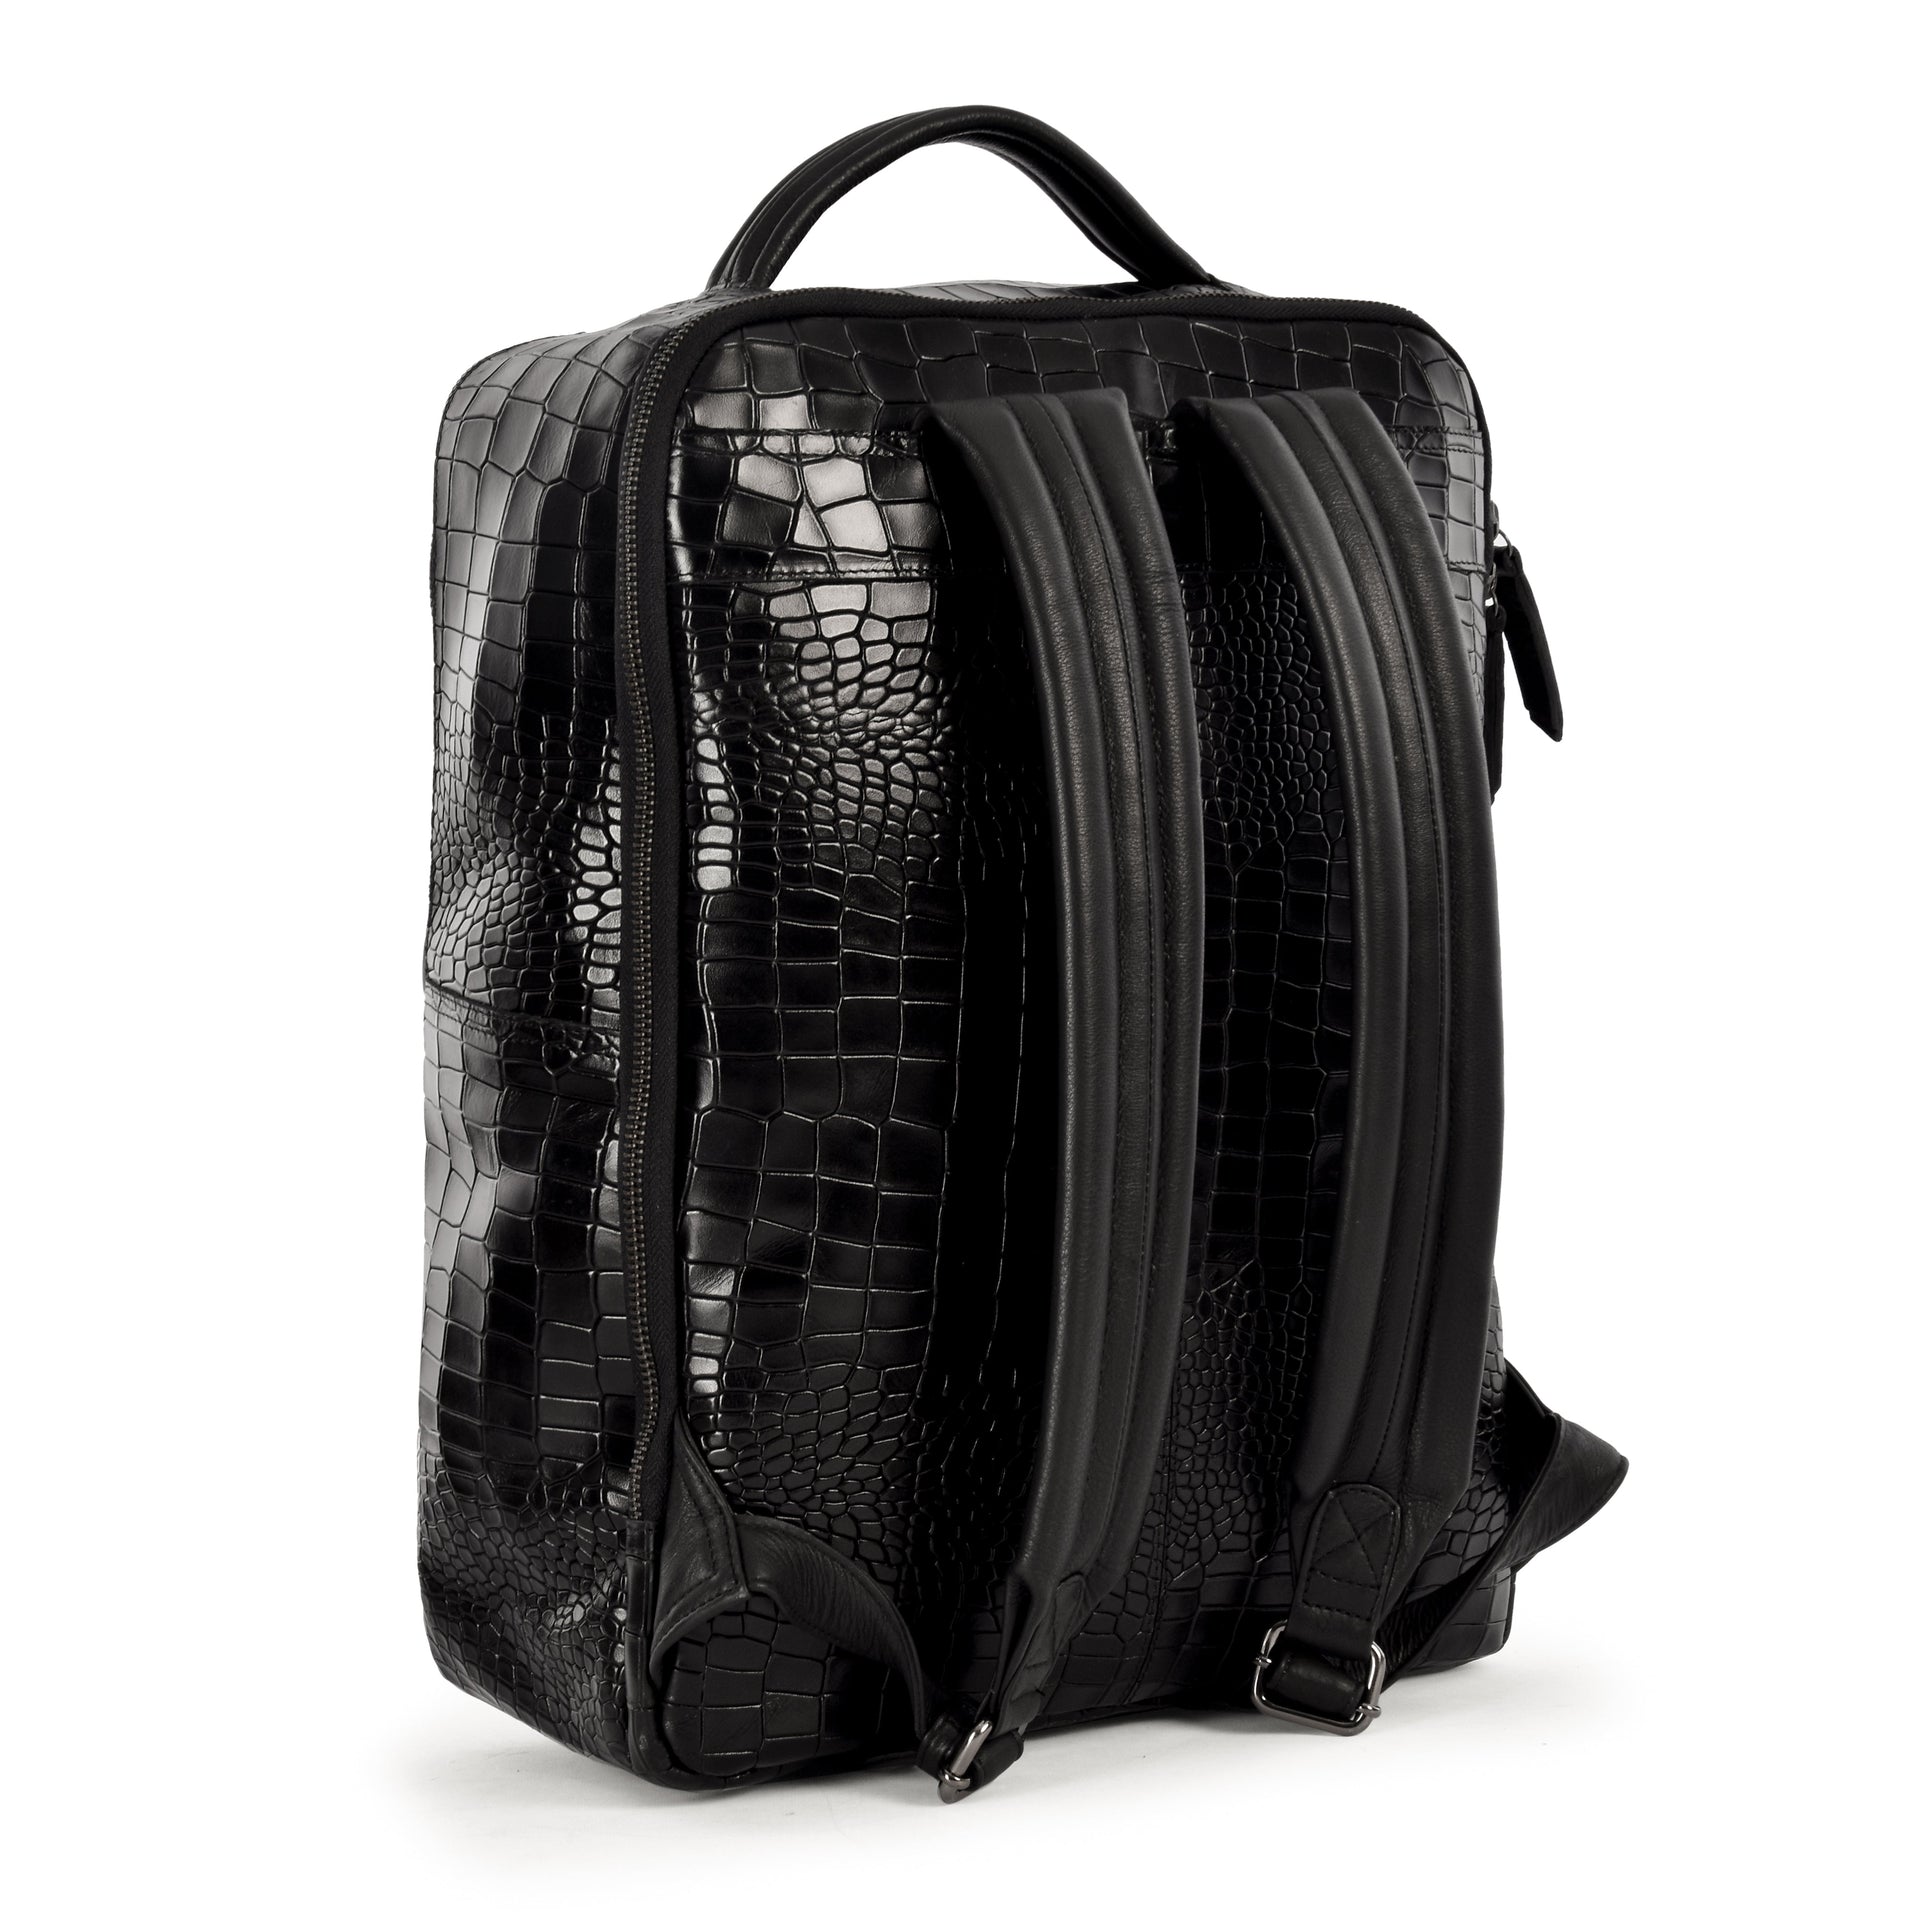 Caswell Backpack - Salient Black - Backpack